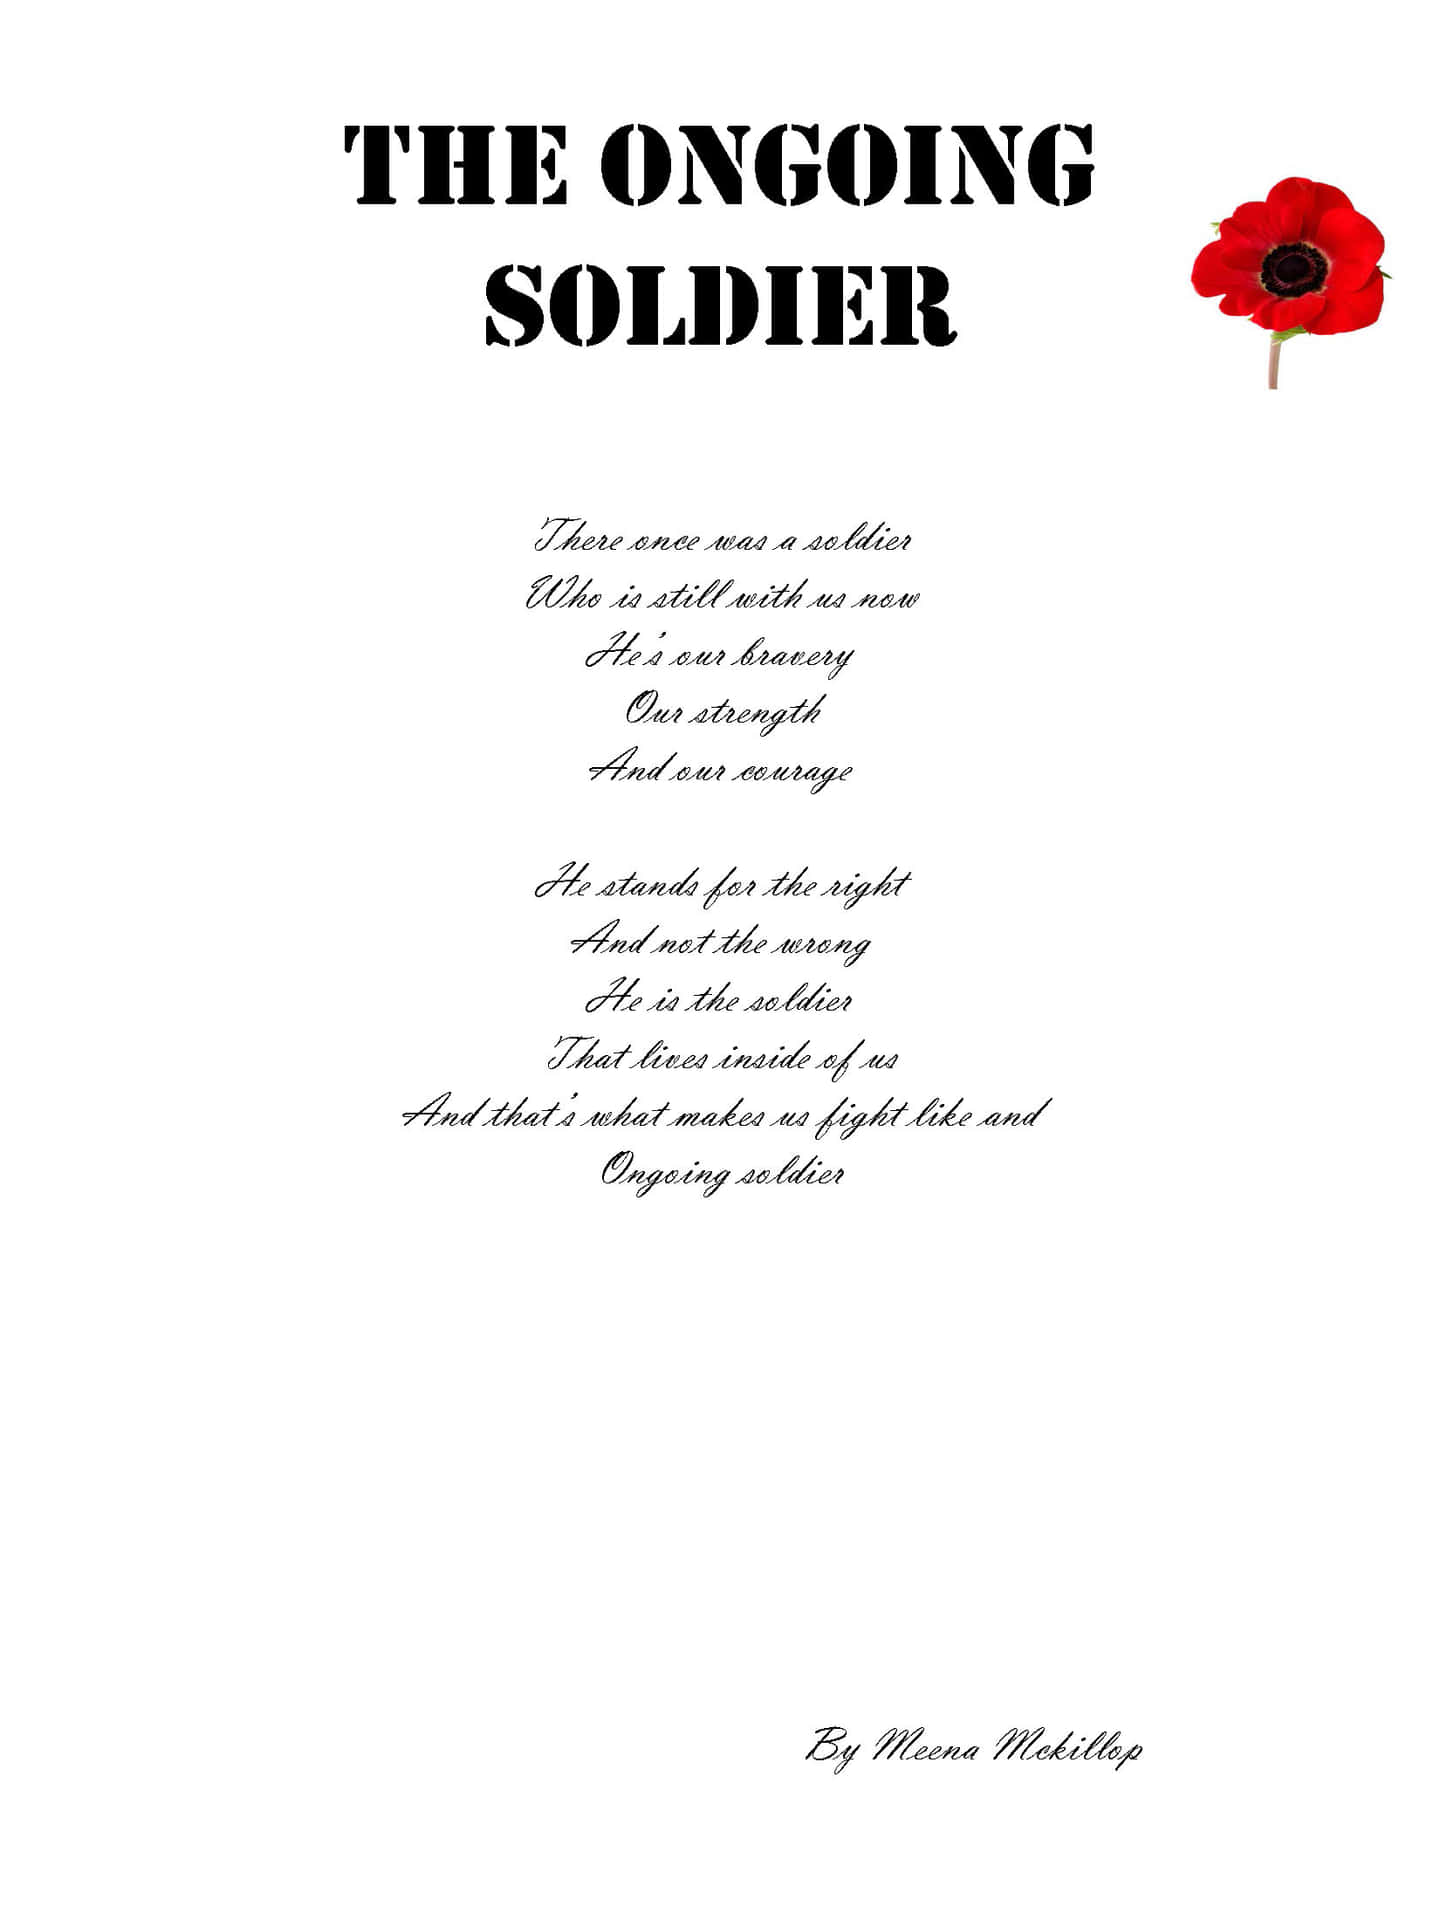 The Ongoing Soldier Poem